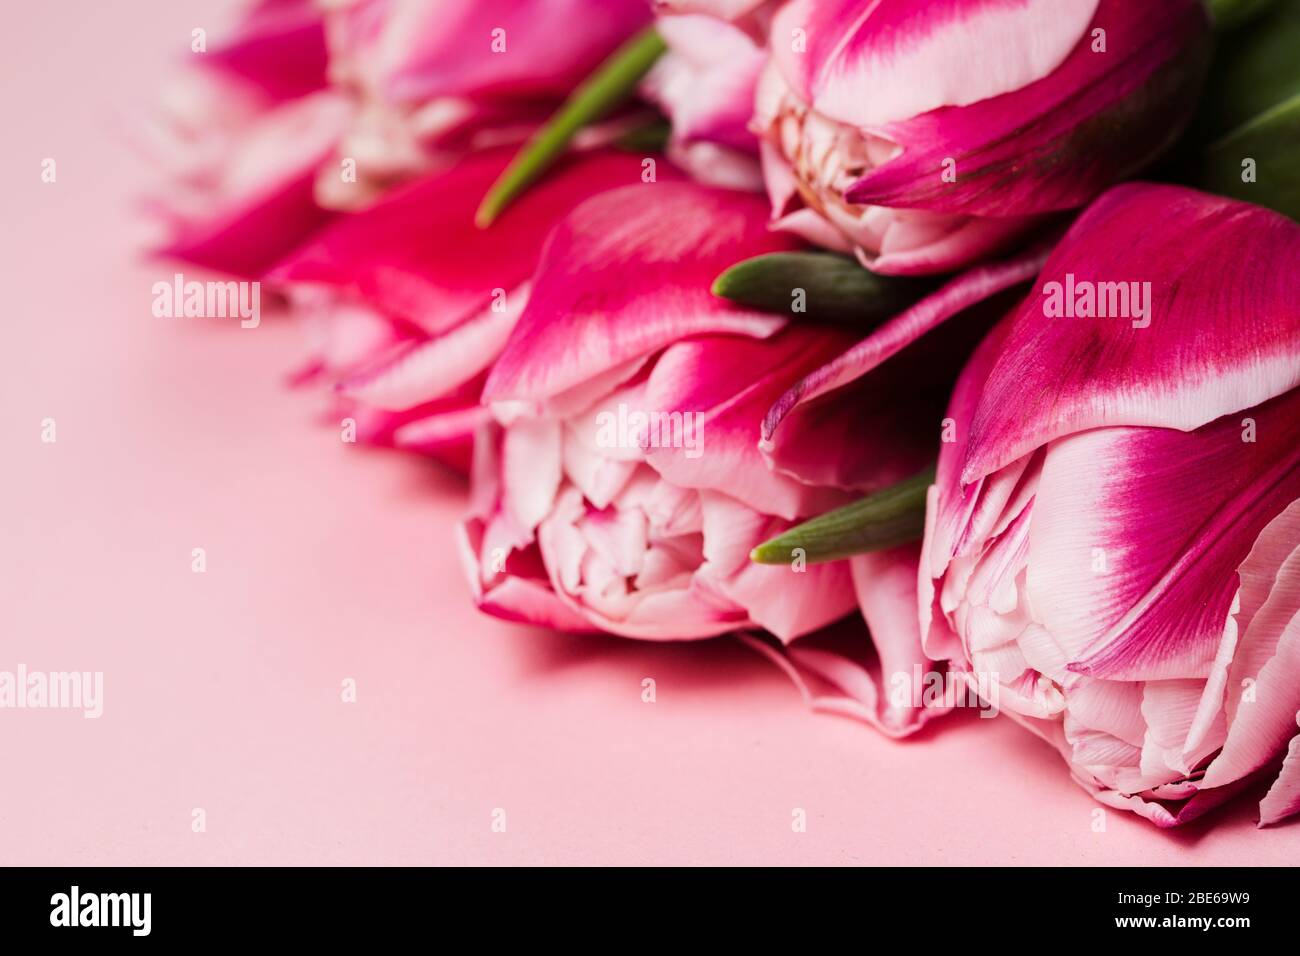 Bouquet of pink tulips flowers on pinkish table. Happy Valentine's day monochrome pink background. Mother's day concept. Copy space Stock Photo